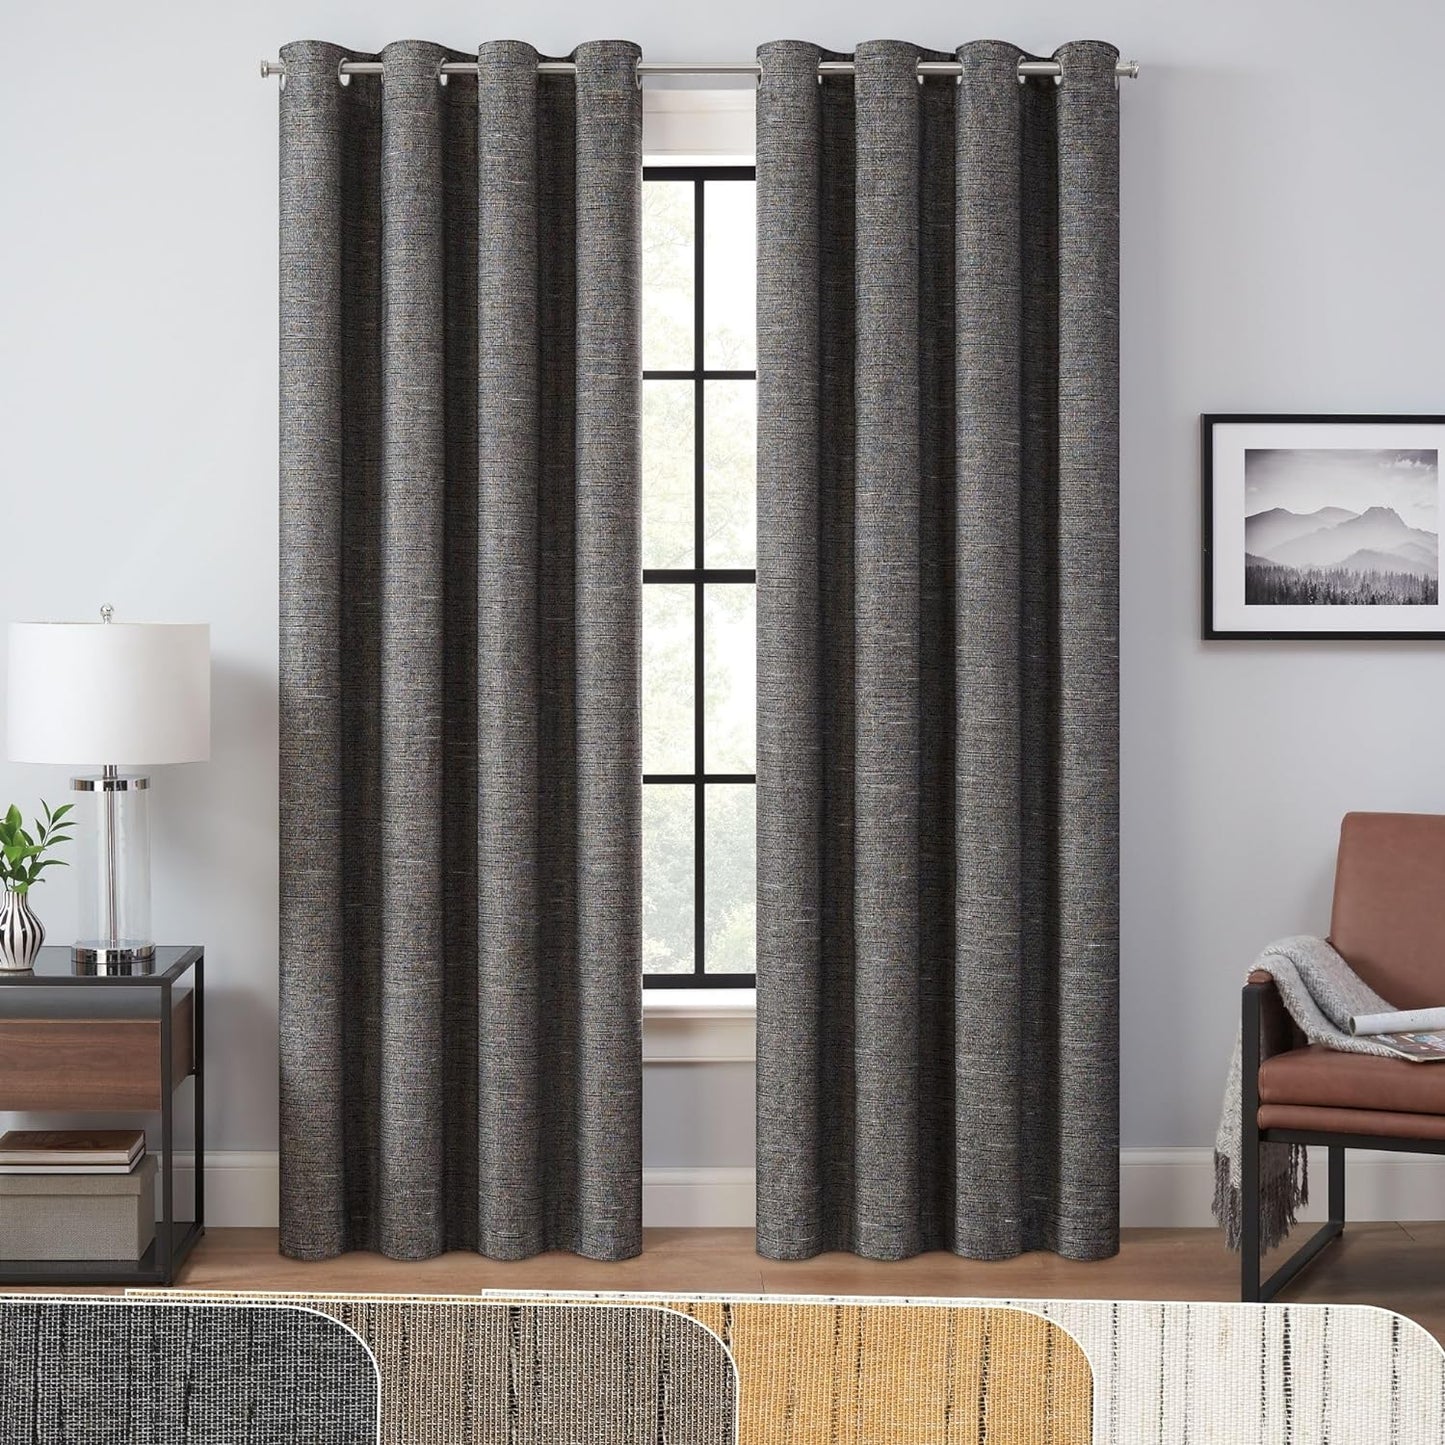 Eclipse Cannes Magnitech 100% Blackout Curtain, Rod Pocket Window Curtain Panel, Seamless Magnetic Closure for Bedroom, Living Room or Nursery, 63 in Long X 40 in Wide, (1 Panel), Natural/ Linen  KEECO Black Grommet 50X84